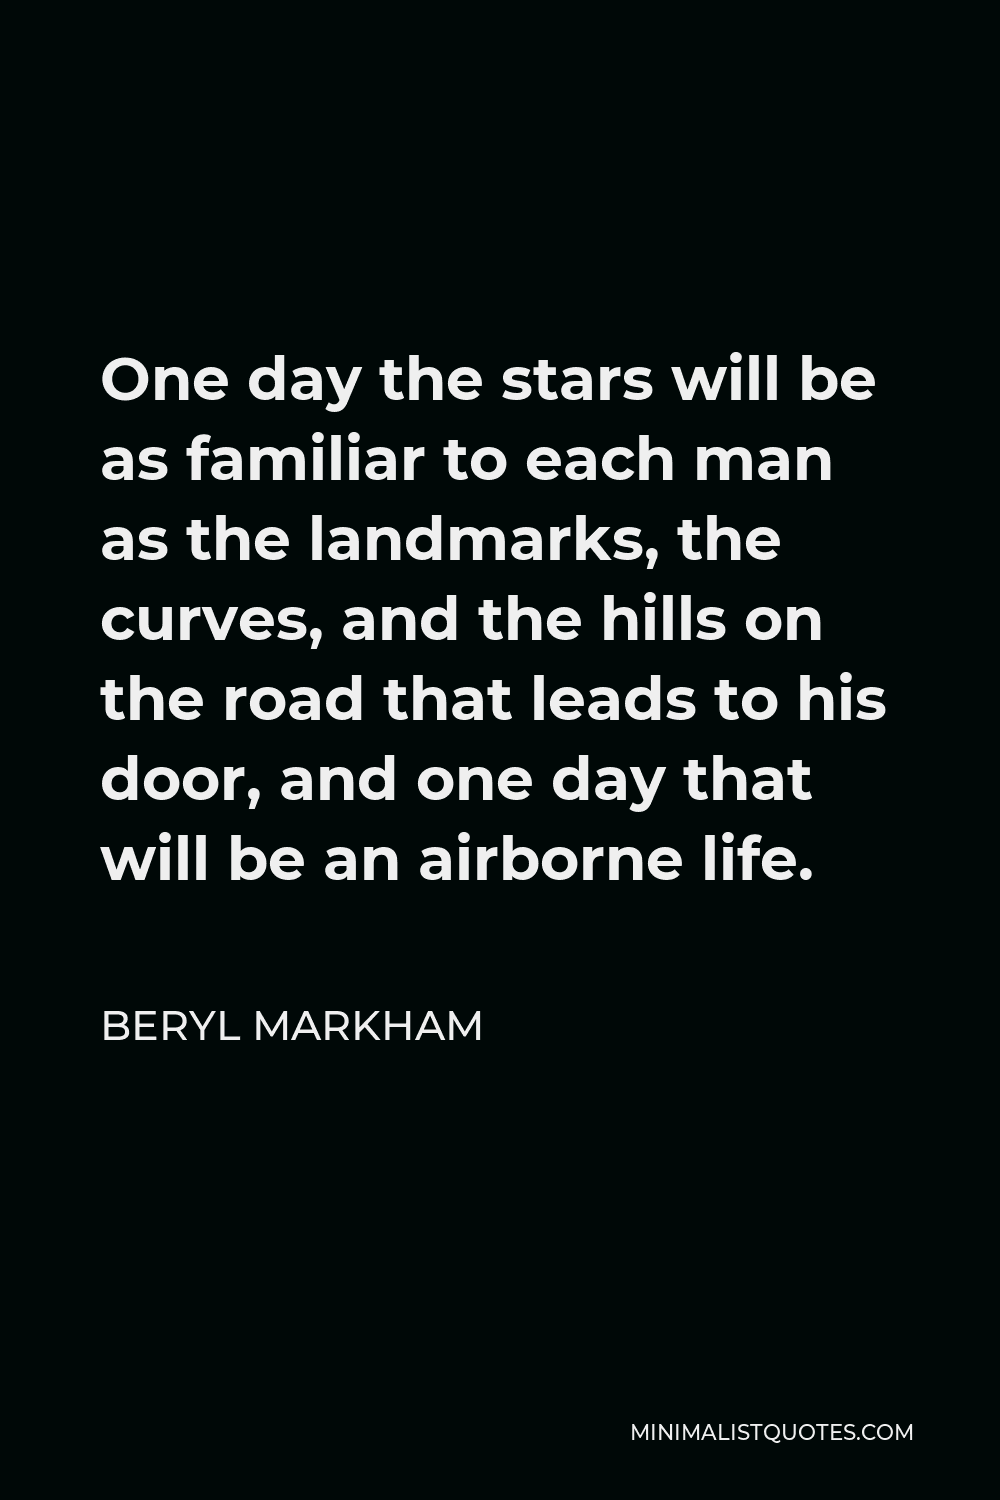 Beryl Markham Quote - One day the stars will be as familiar to each man as the landmarks, the curves, and the hills on the road that leads to his door, and one day that will be an airborne life.